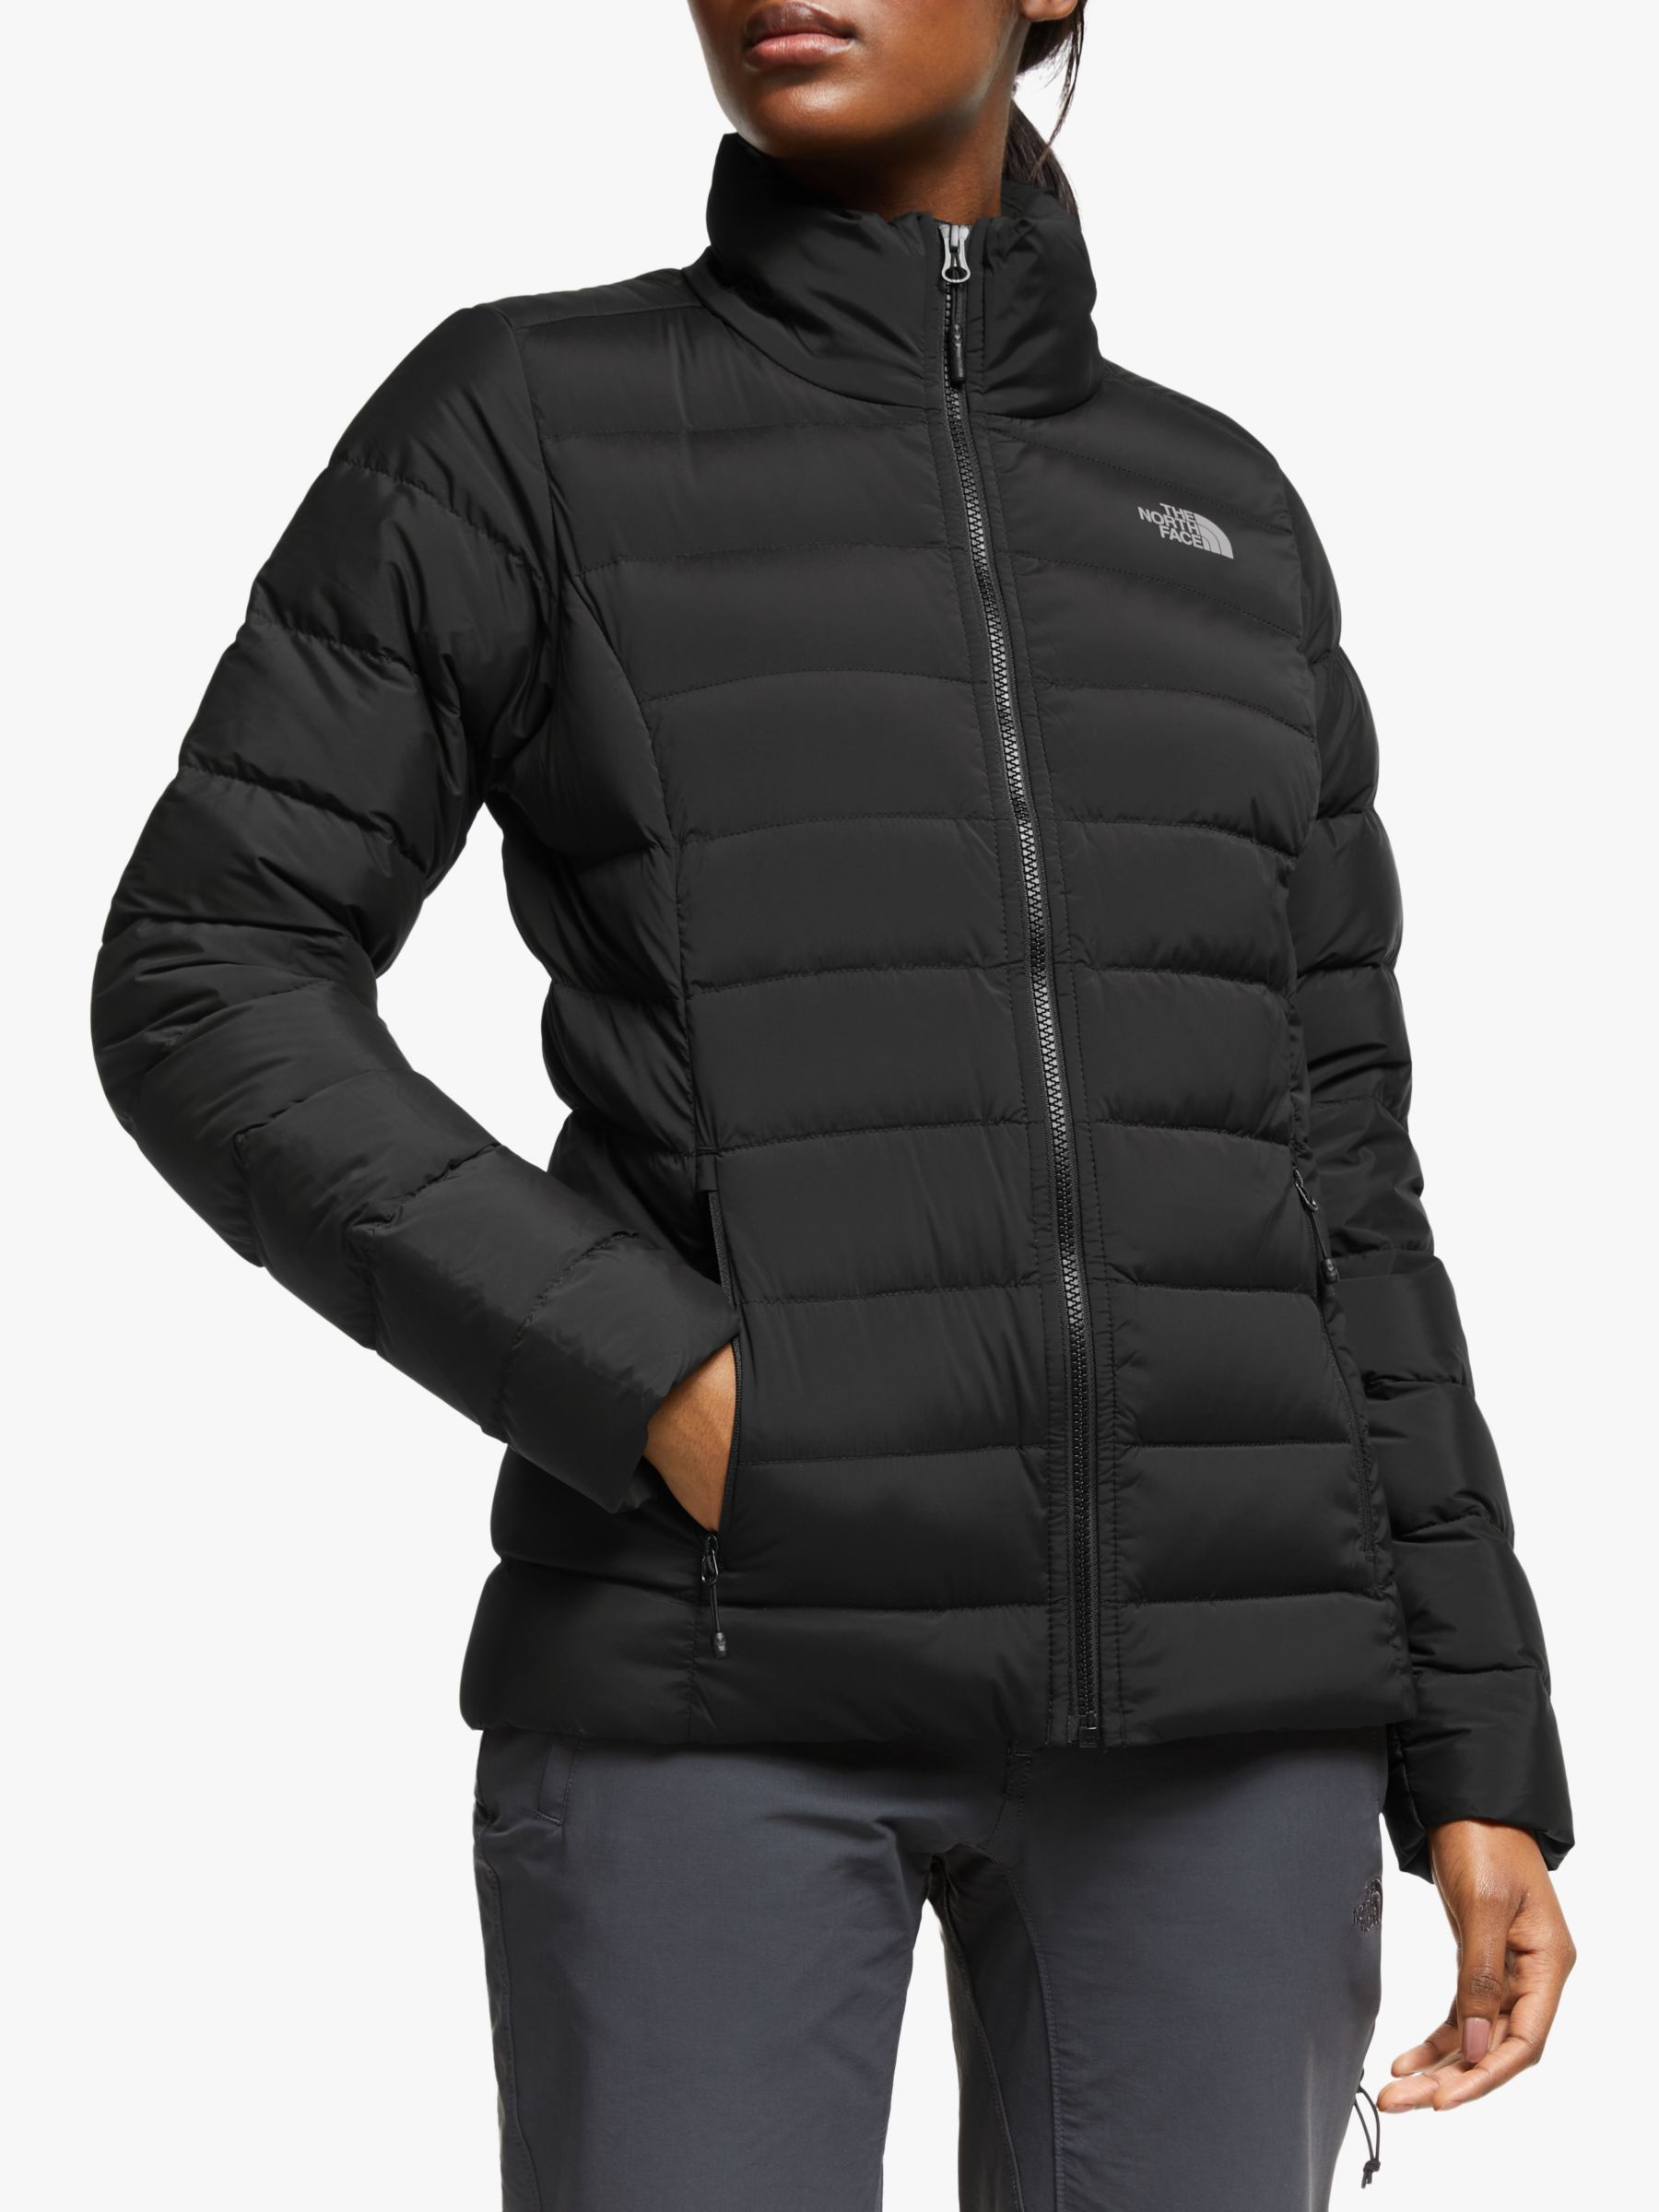 the north face women's coat